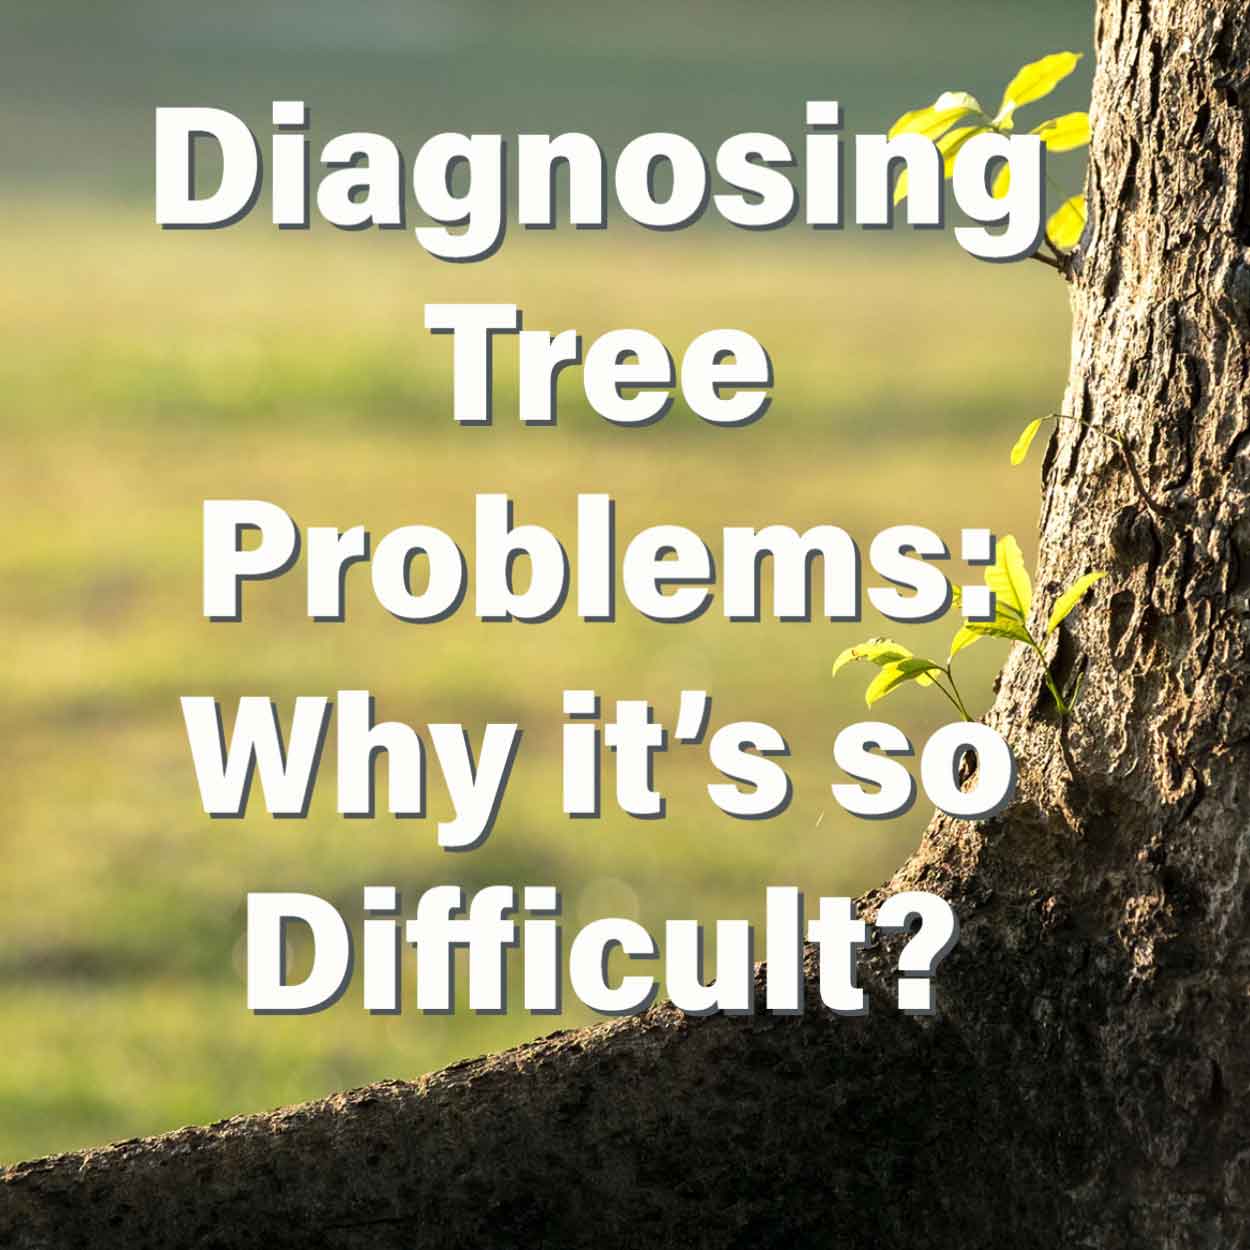 Diagnosing Tree Problems: Why it's so Difficult?”